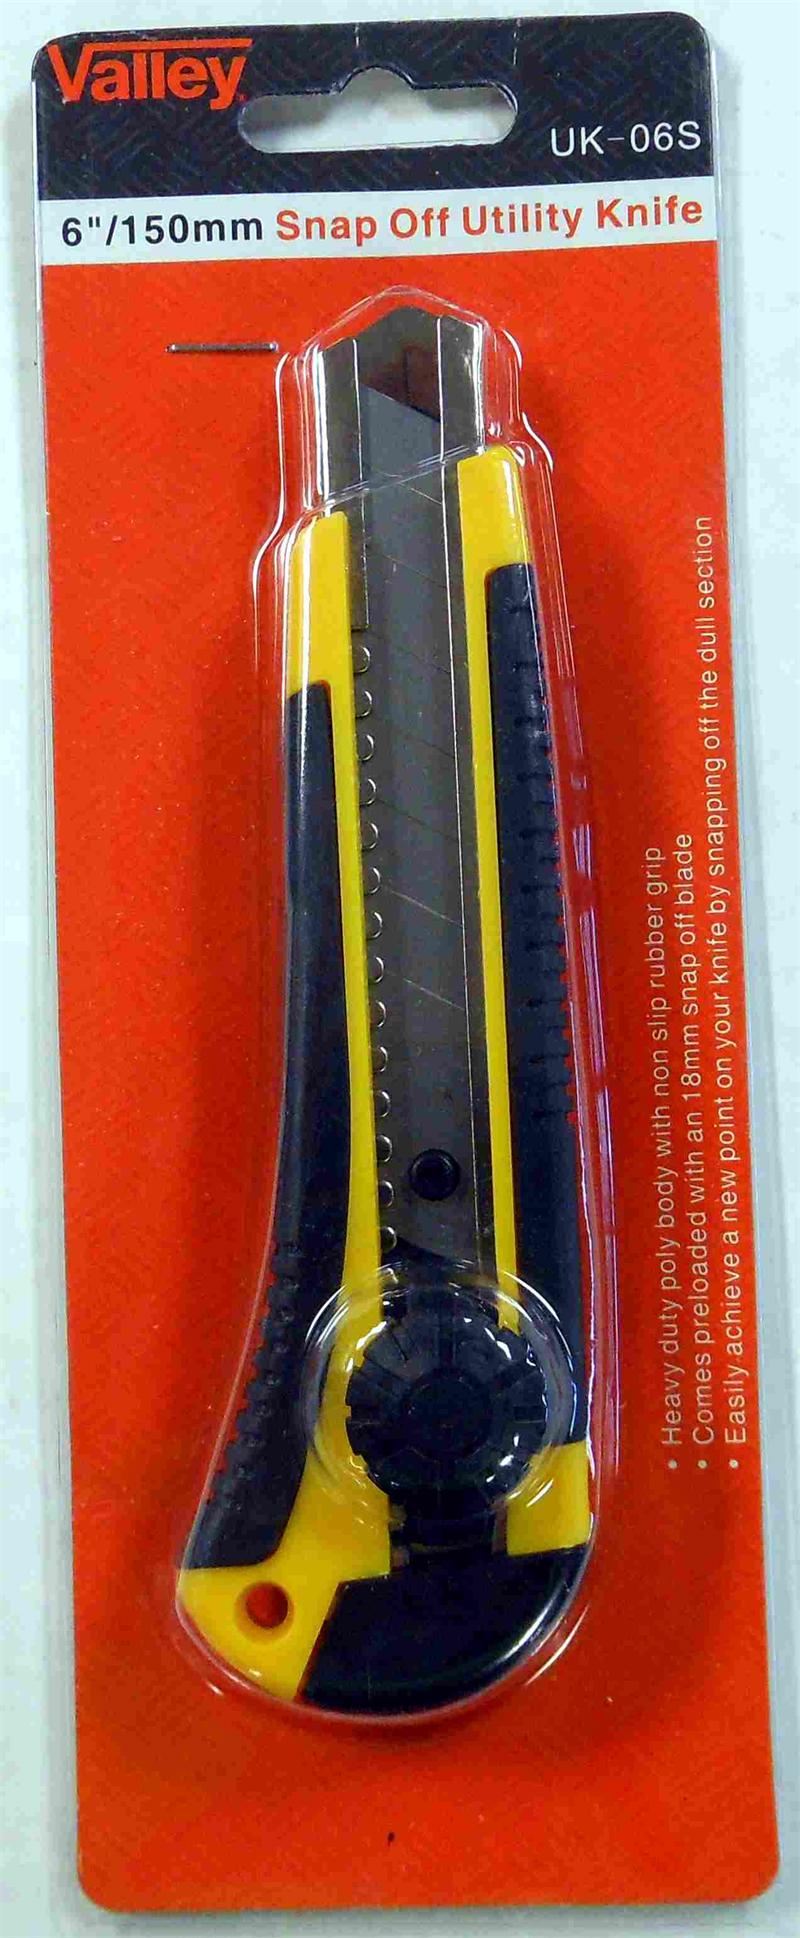 6 Utility KNIFE with Snap-Off Blade